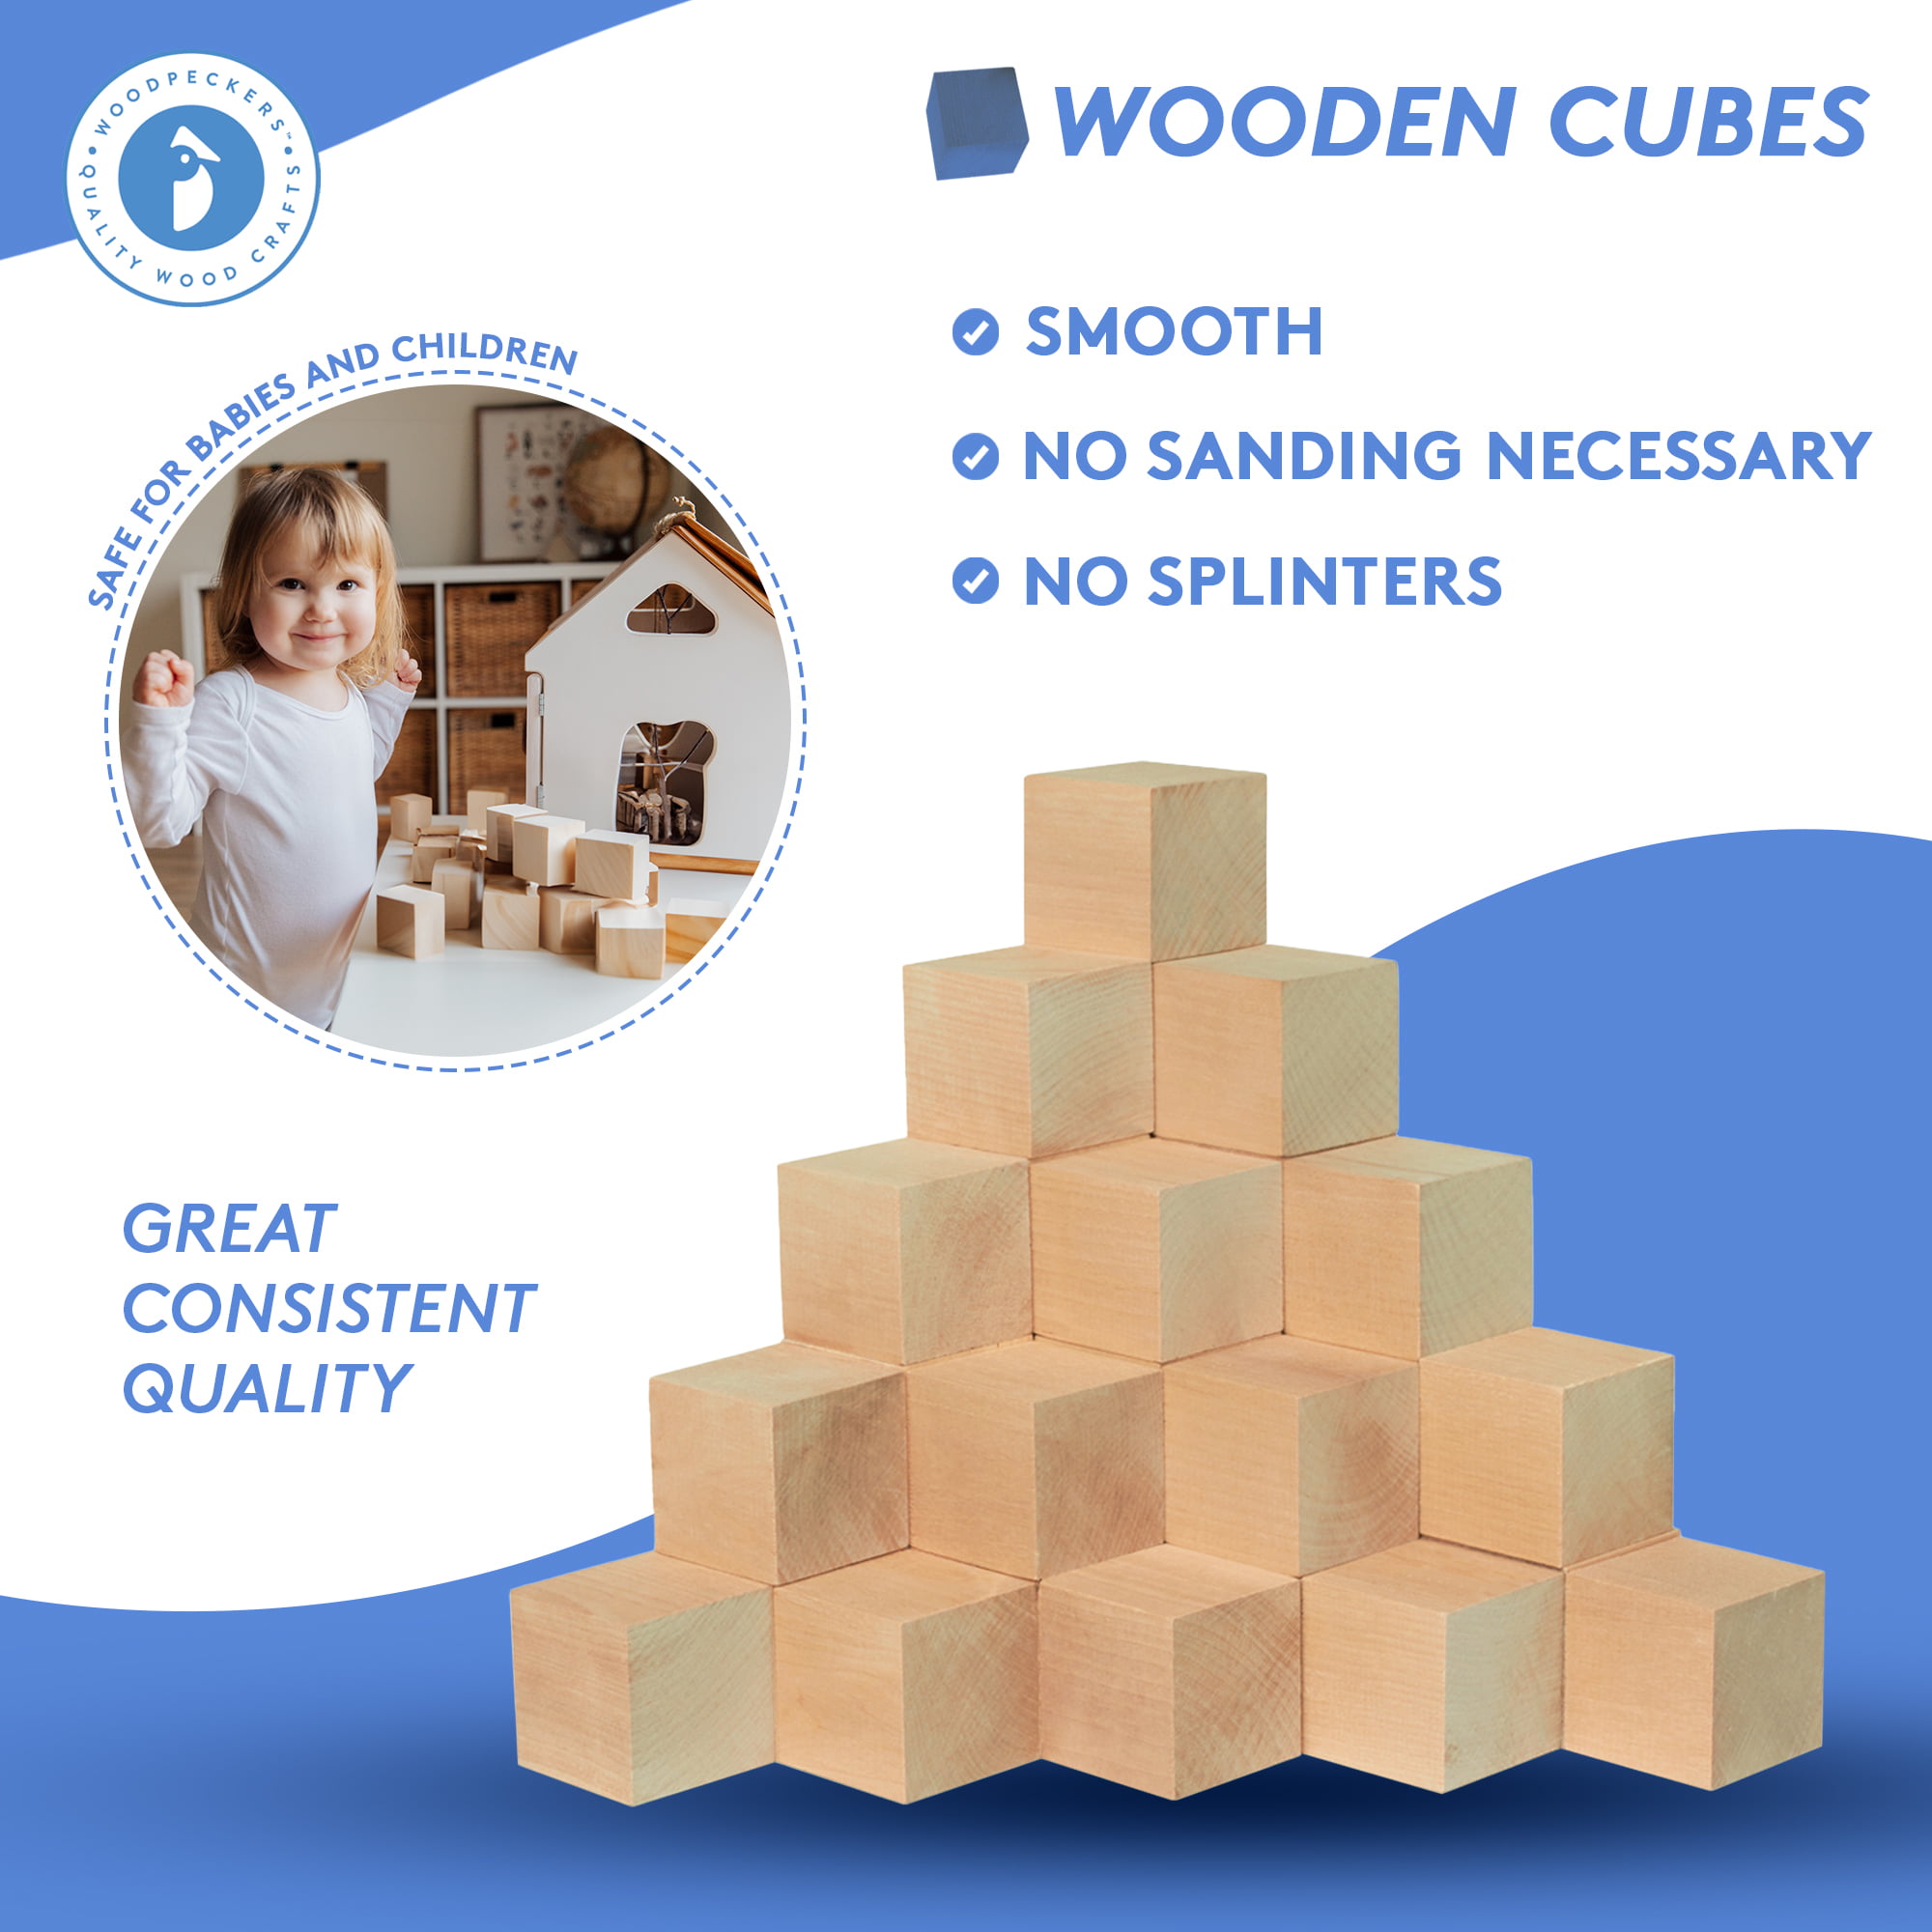 HOIGON 150 PCS 1 Inch Colorful Wooden Blocks, Small Wooden Cubes with  Assorted Colors, Colored Square Wood Block for Crafts